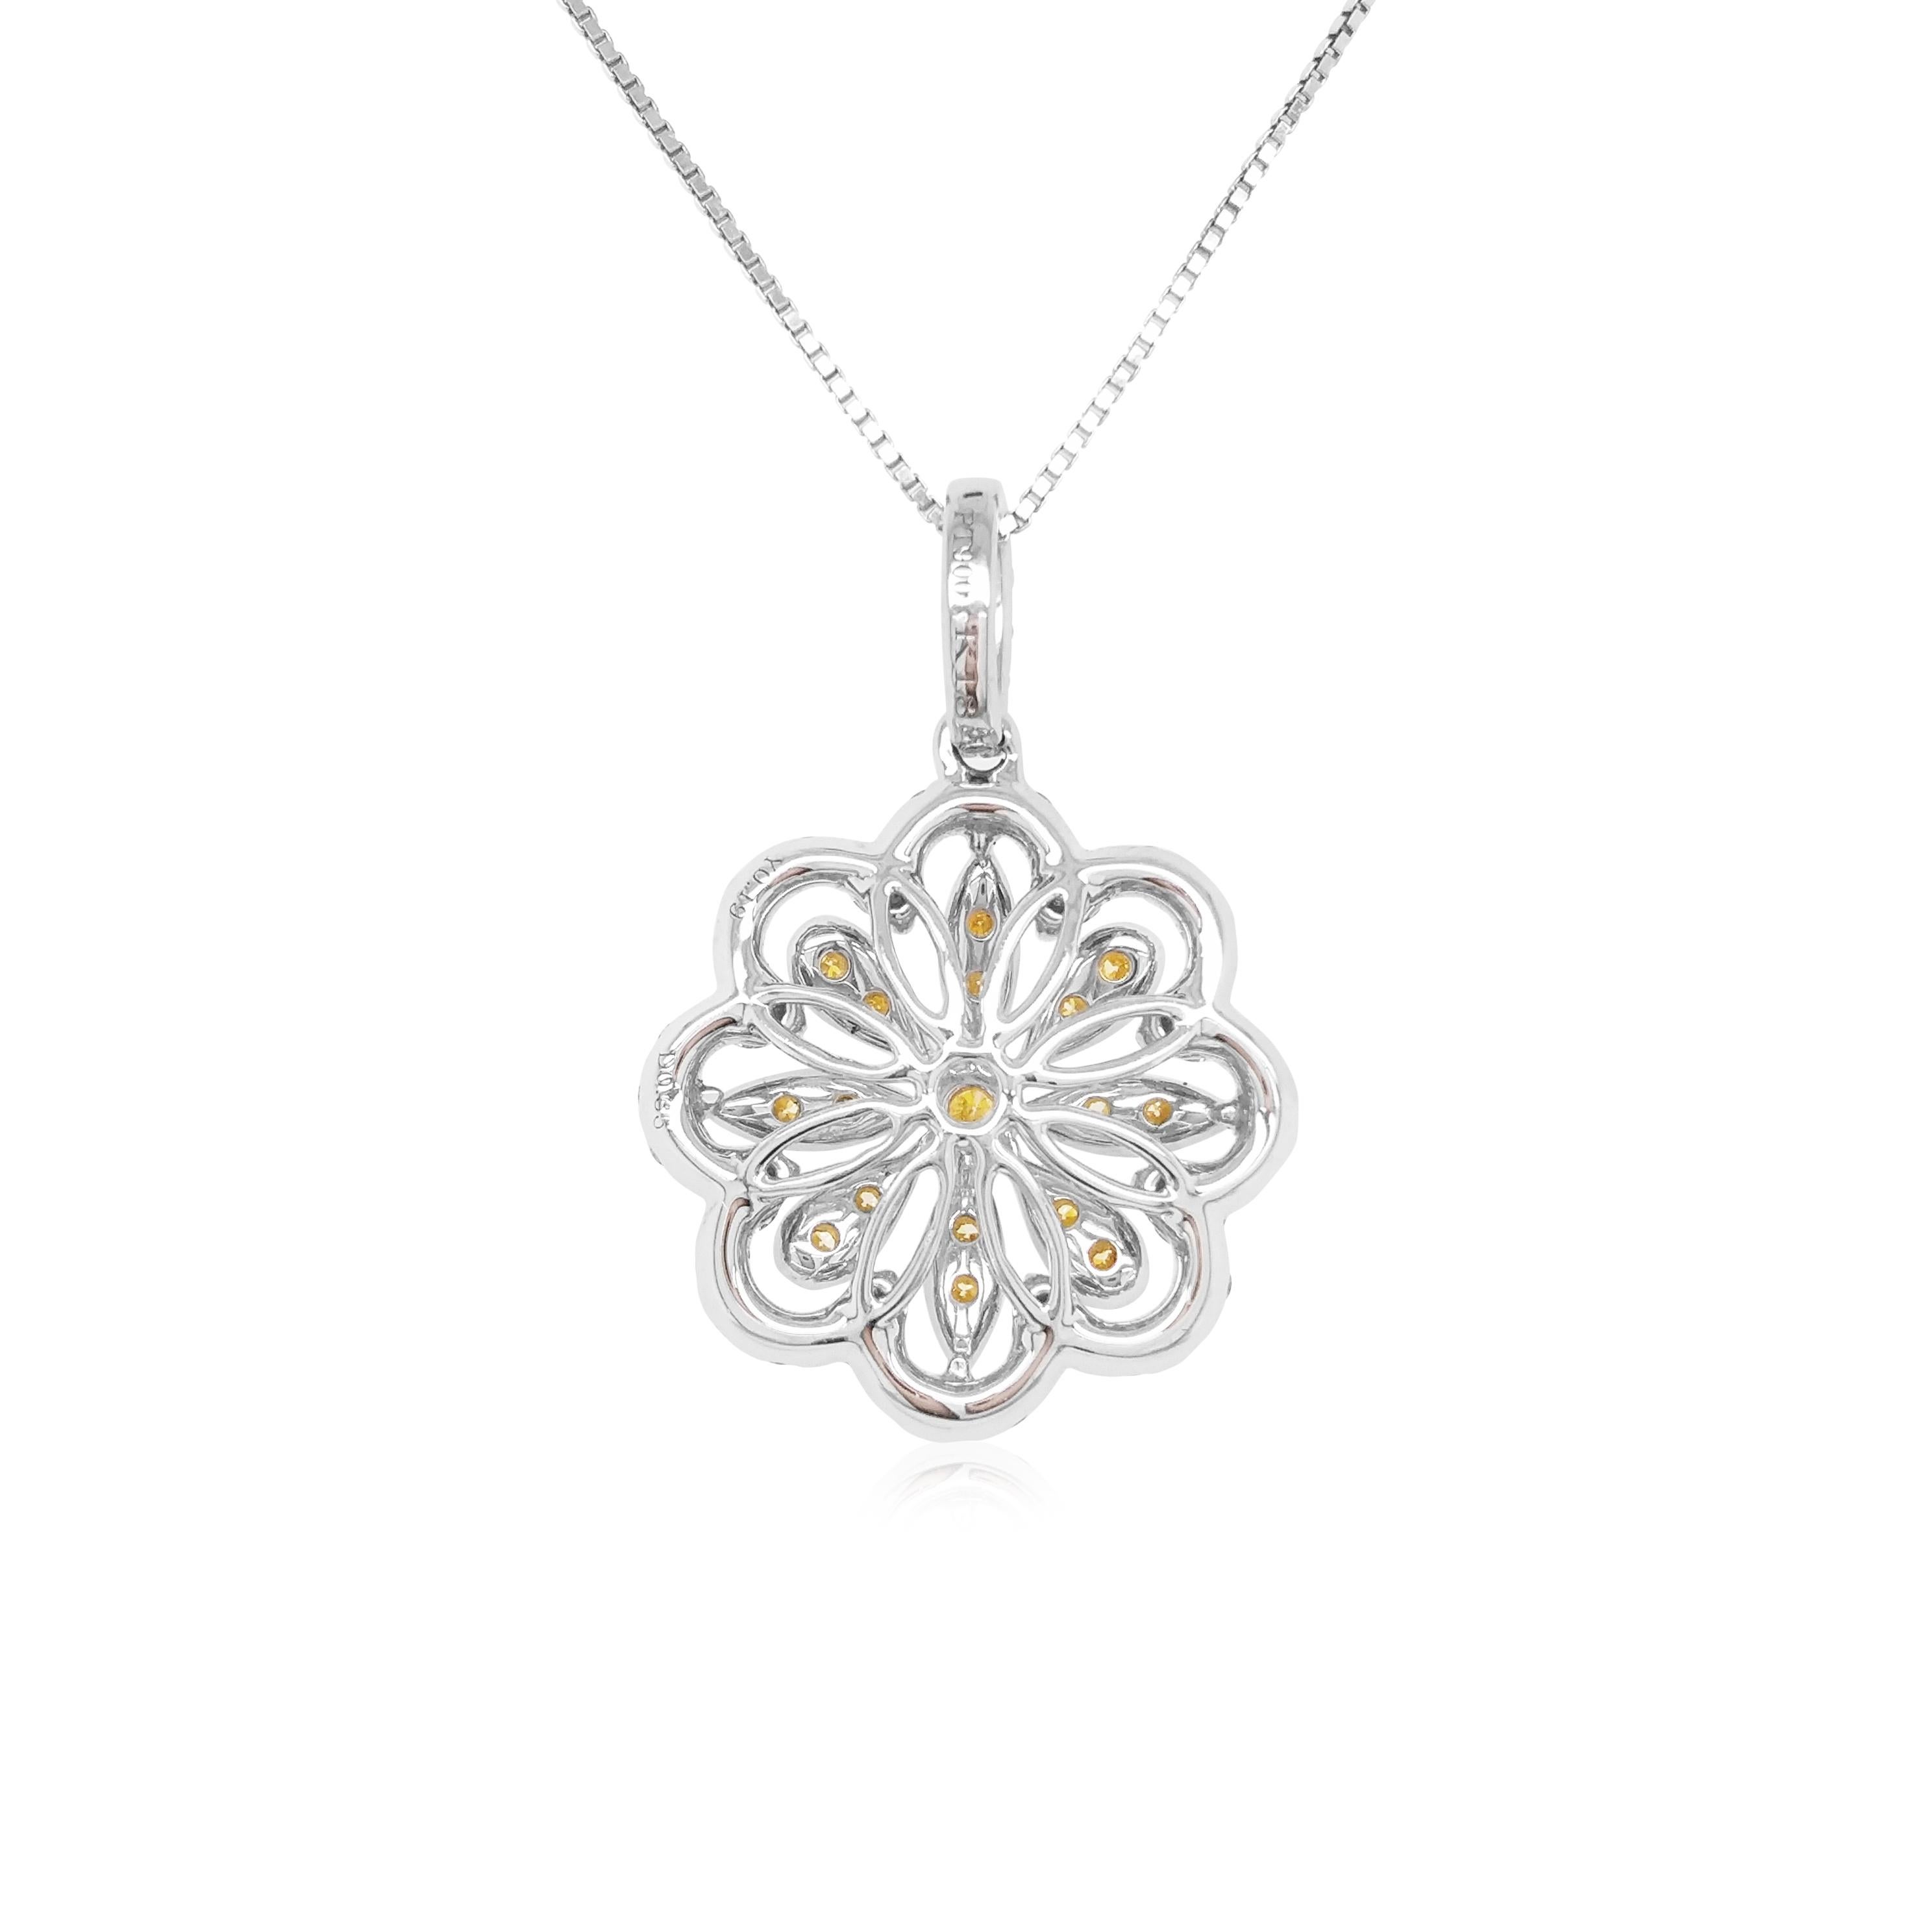 This unique flower shaped pendant features natural Yellow diamonds at the heart of the design. The rich colour of these diamonds is complimented perfectly by the delicate platinum floral design which completed by a combination of round brilliant-cut